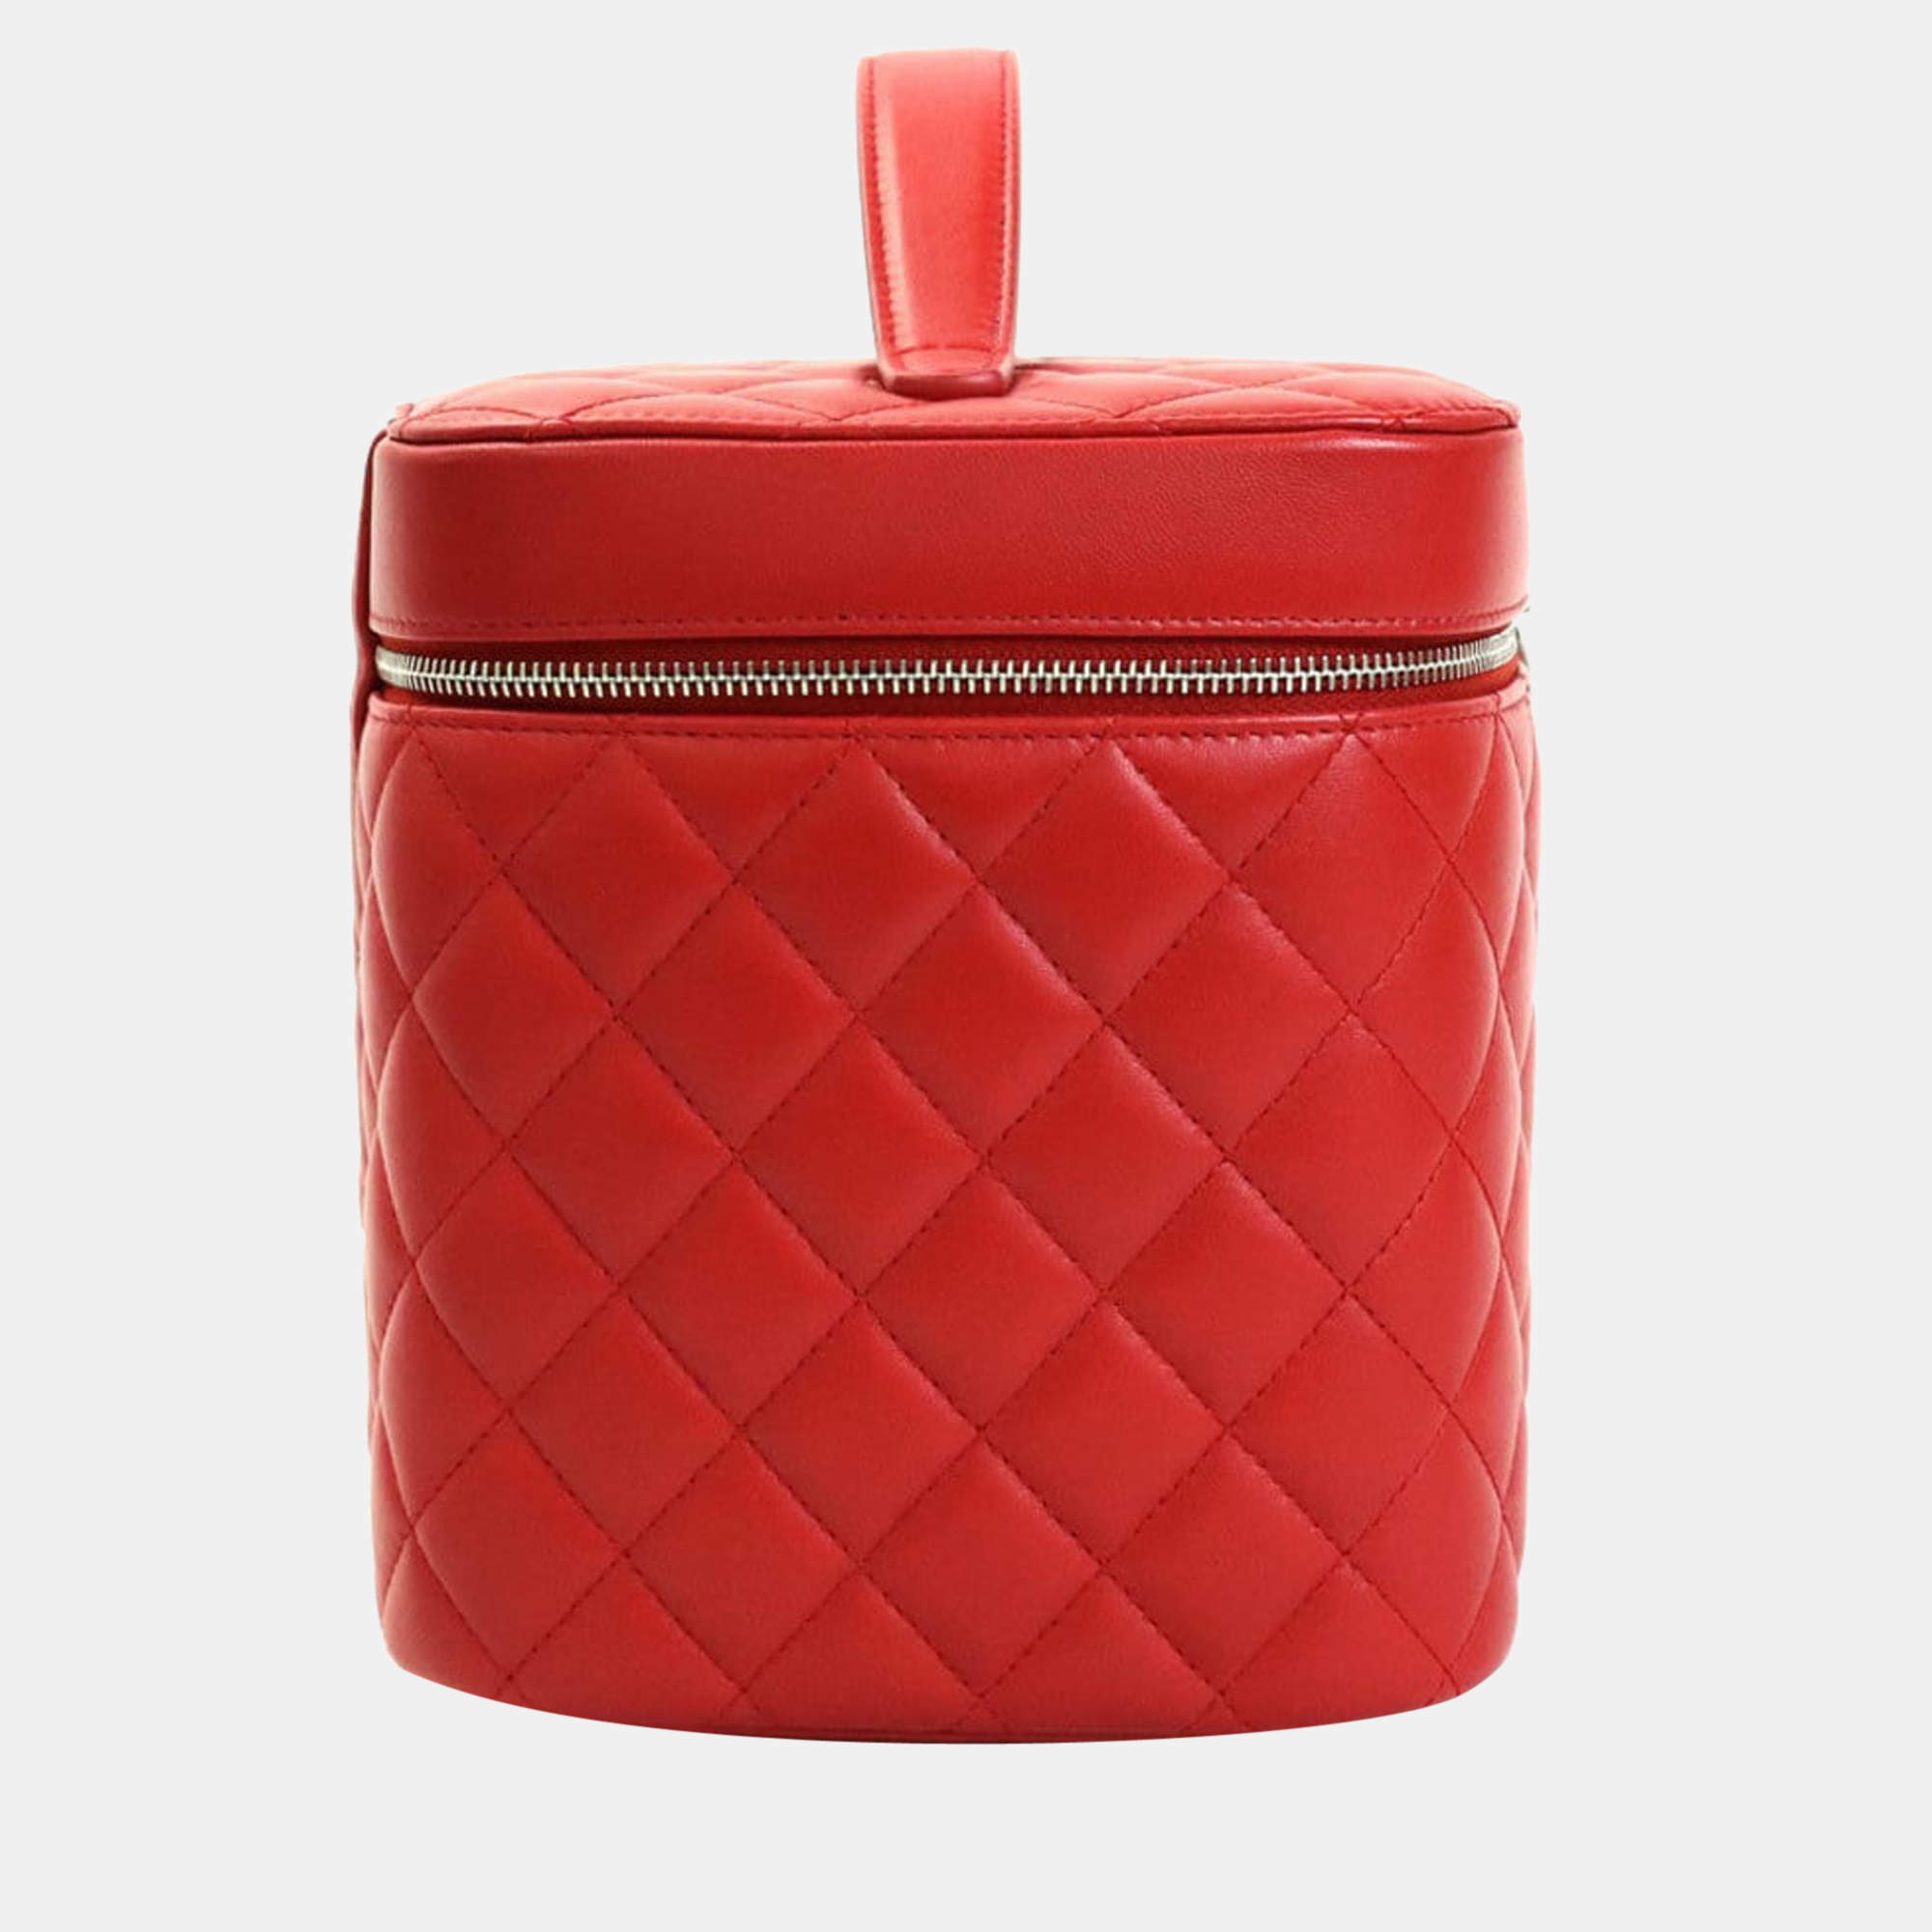 Chanel Red Leather Top Handle Vanity Case